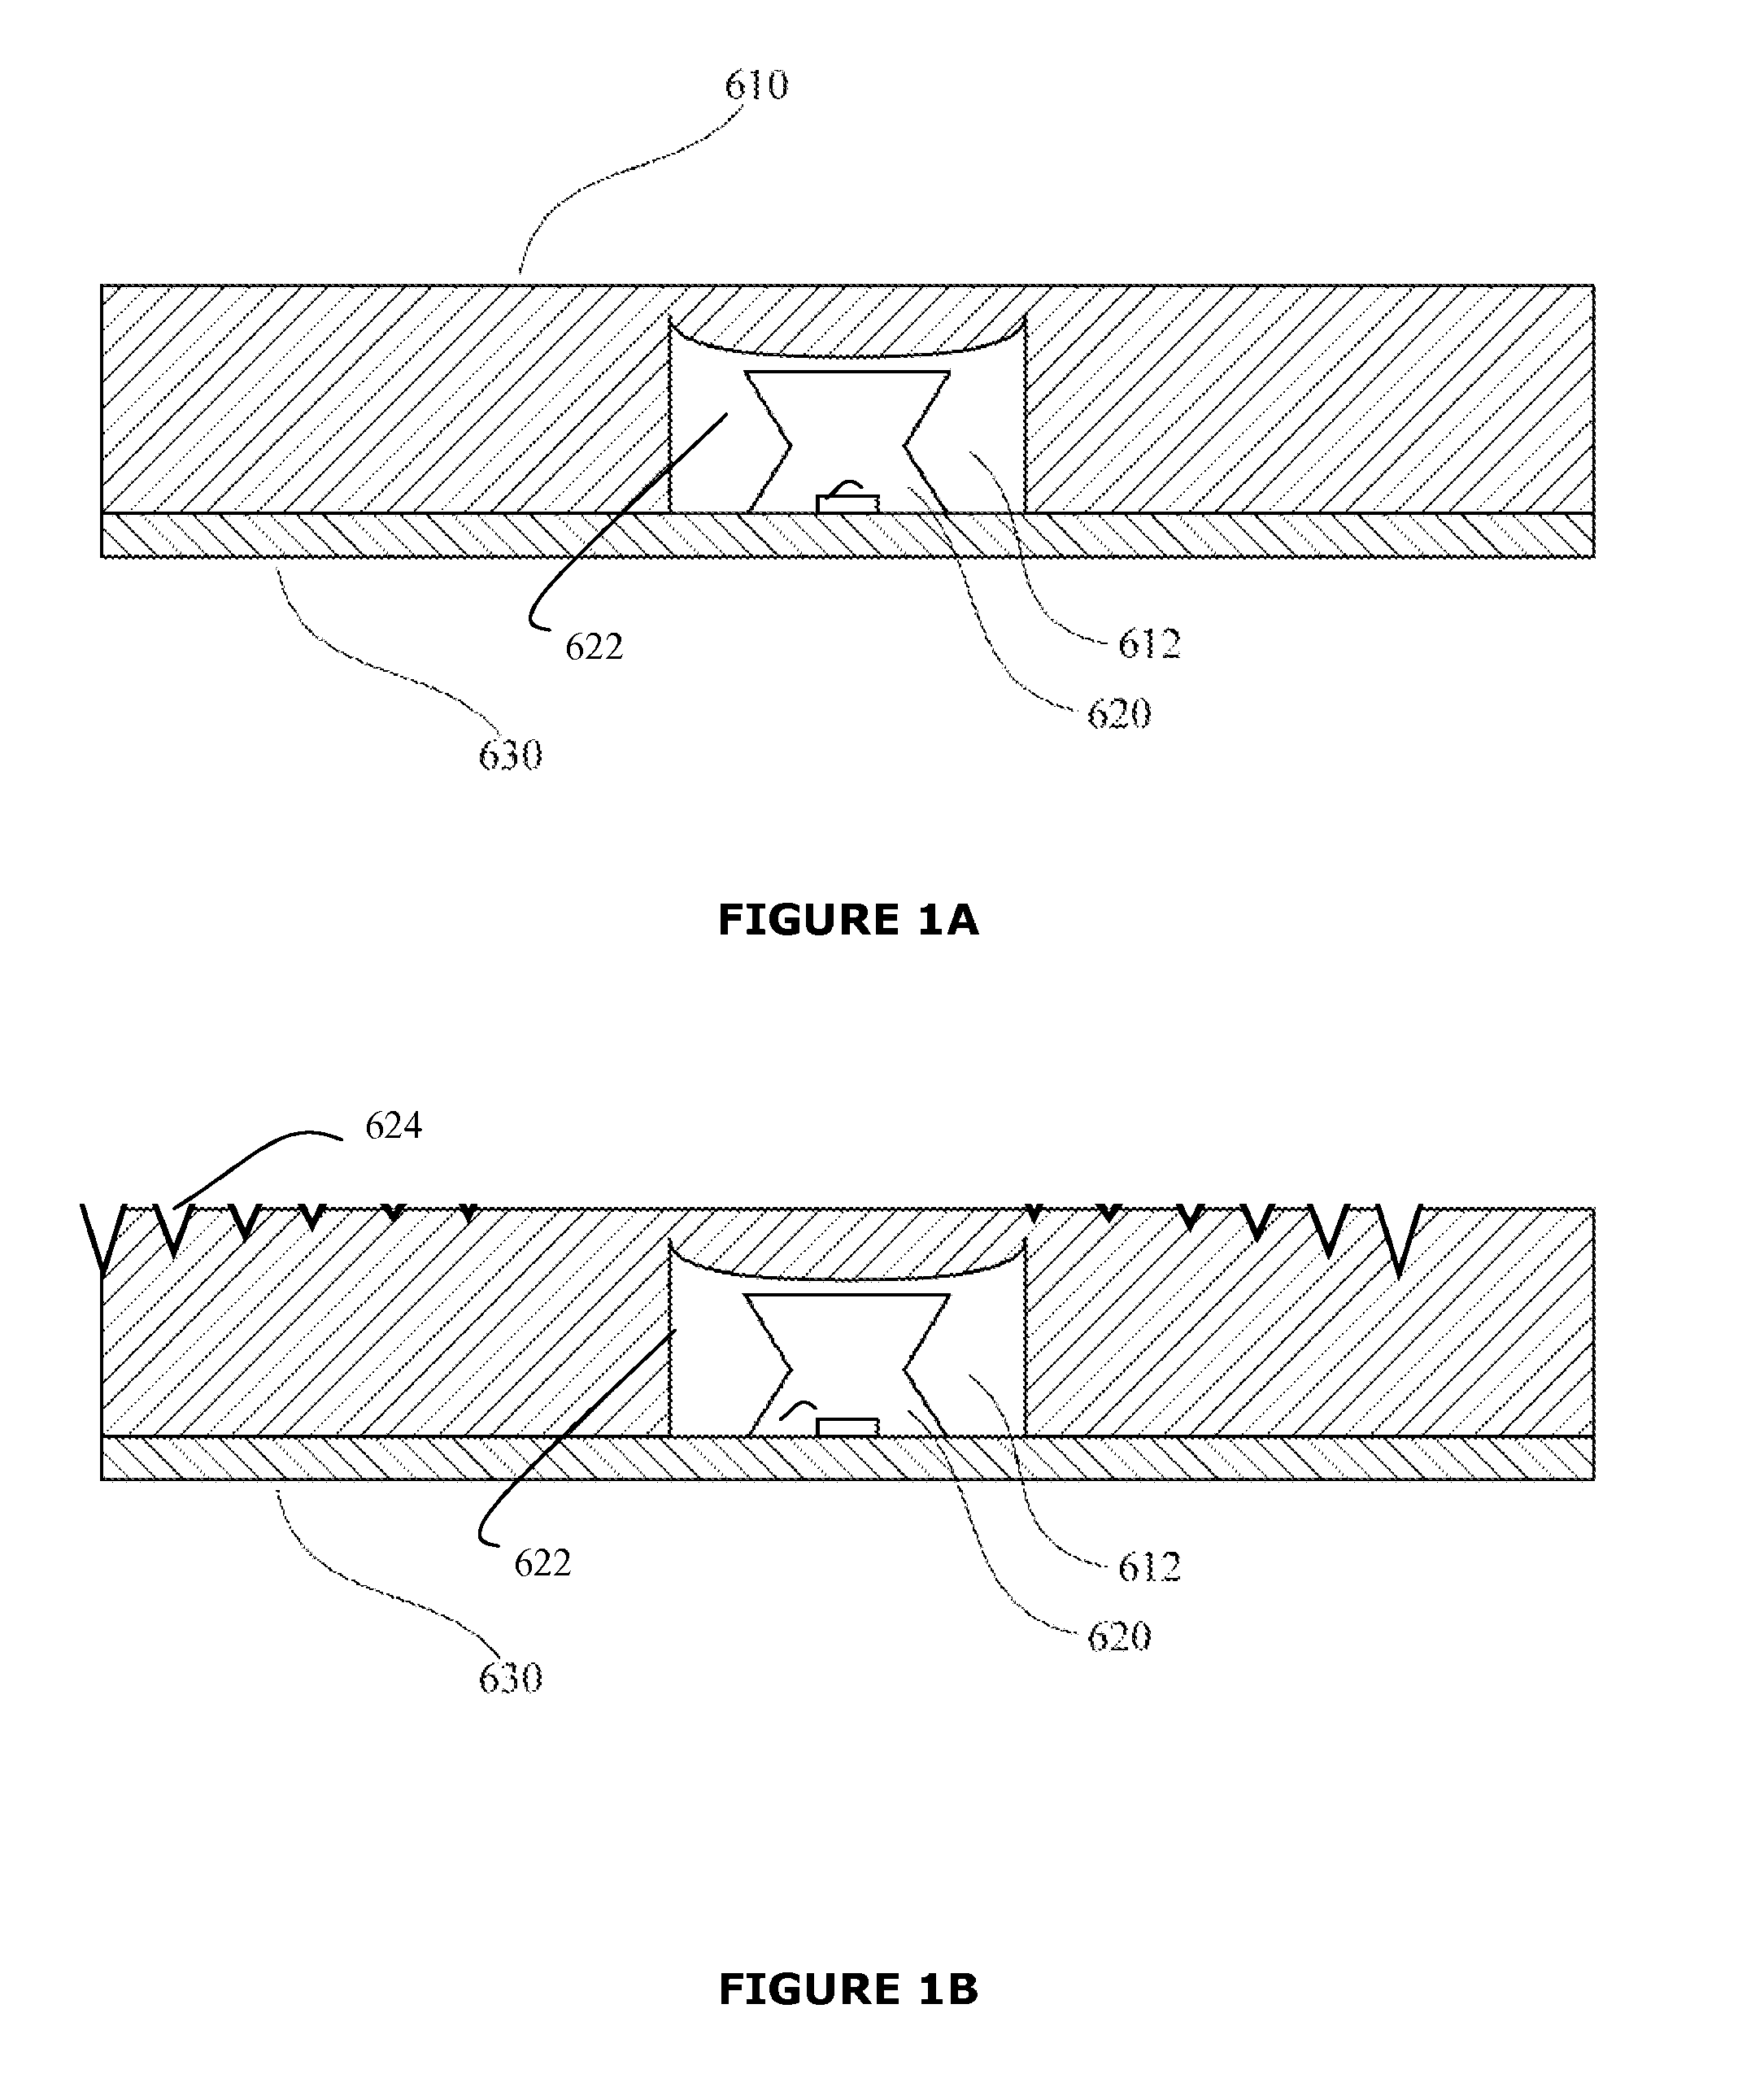 Lighting system for creating an illuminated surface